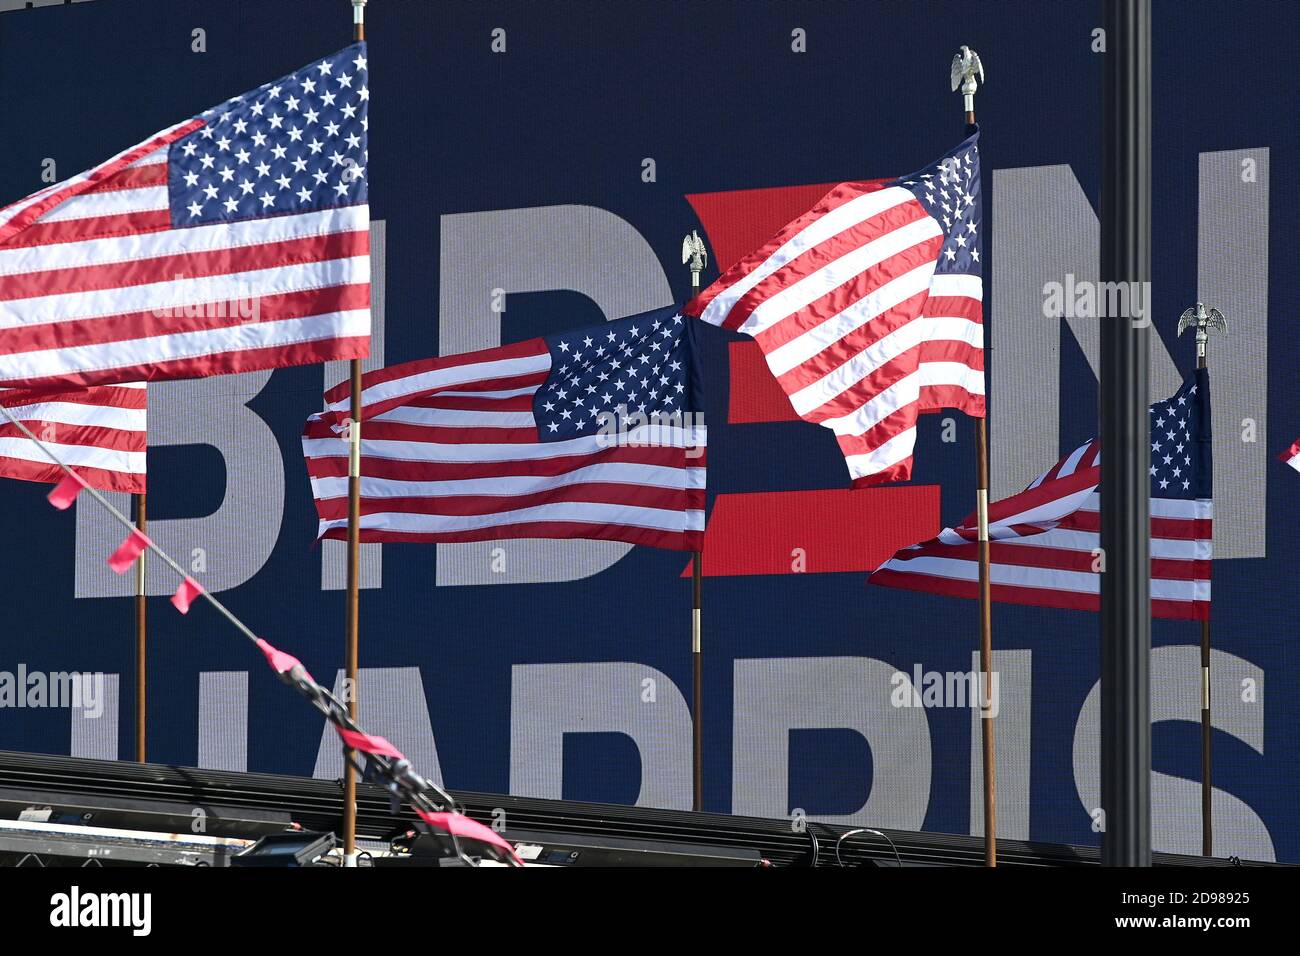 Wilmington, USA. 03rd Nov, 2020. A side view of the stage background where Democratic Presidential candidate Joe Biden is expected to speak later on in the day, in Wilmington, DE, November 3, 2020. Today is voting day for the 2020 U.S. Presidential election that has a Democratic ticket of former Vice President Joe Biden and his Vice President nominee Kamala Harris and a Republican ticket of incumbent President Donald J. Trump and Vice President Mike Pence.(Anthony Behar/Sipa USA) Credit: Sipa USA/Alamy Live News Stock Photo